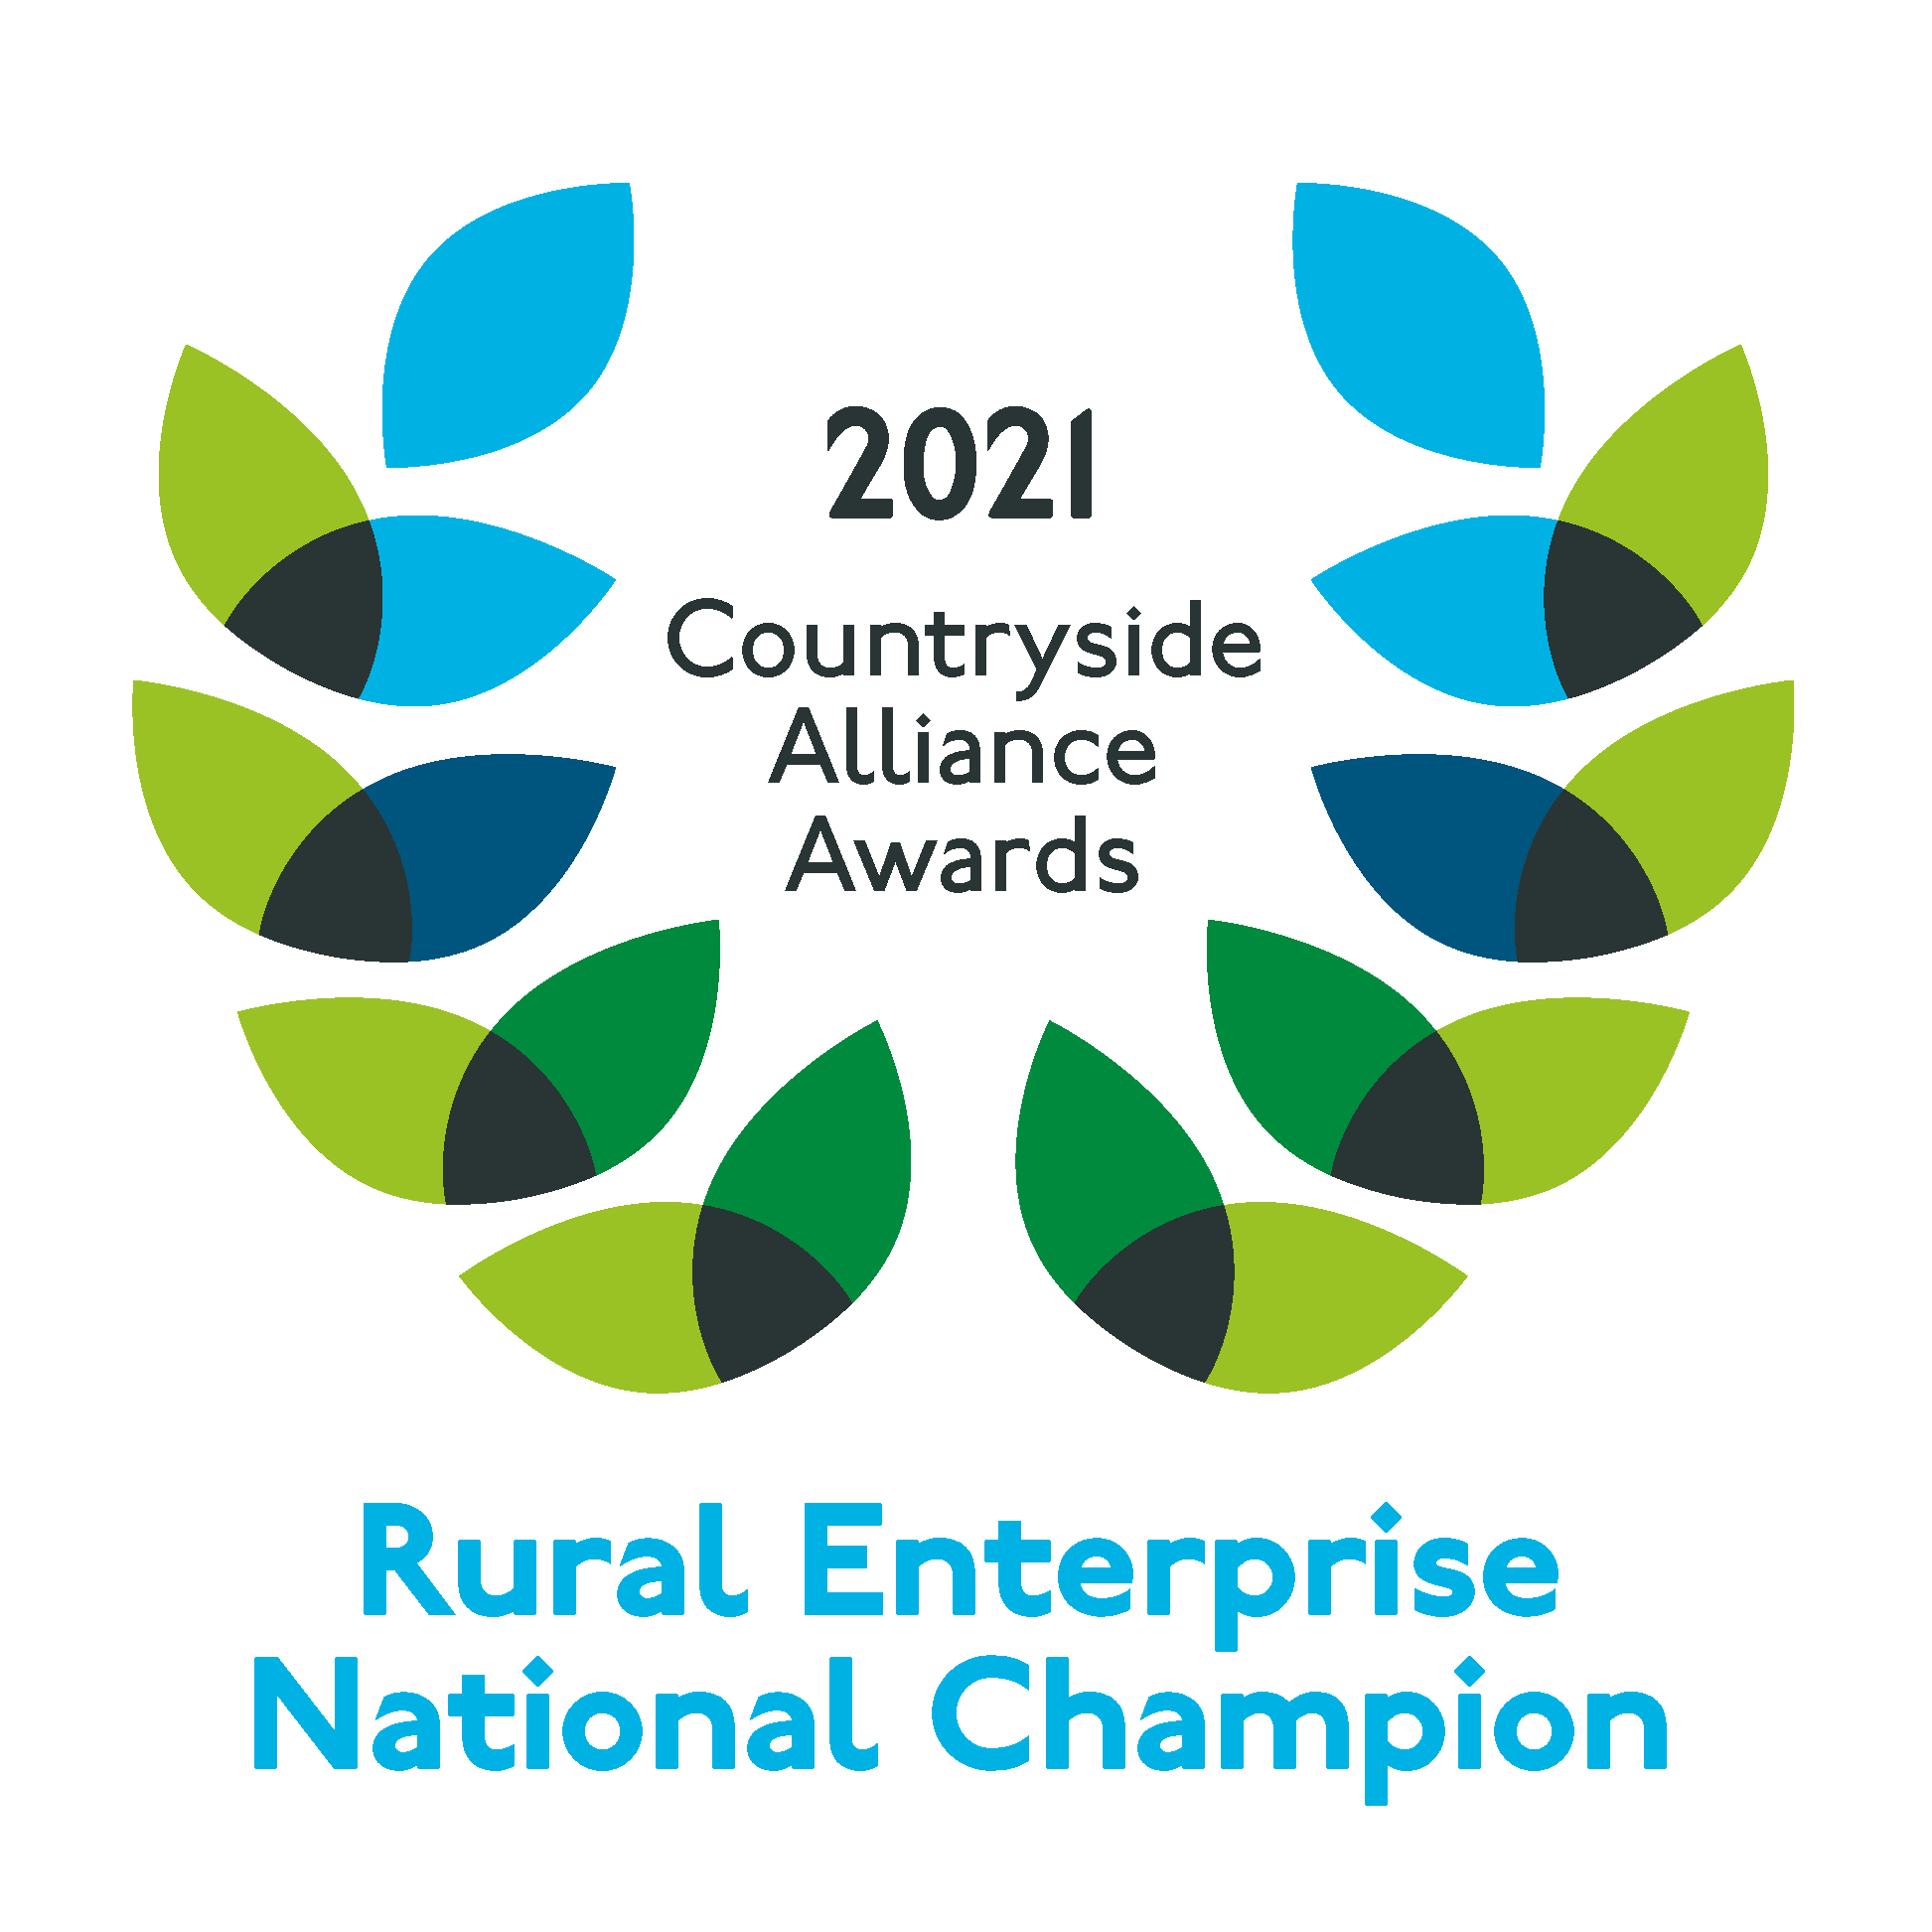 Countryside Alliance Awards - Rural Enterprise National Champions